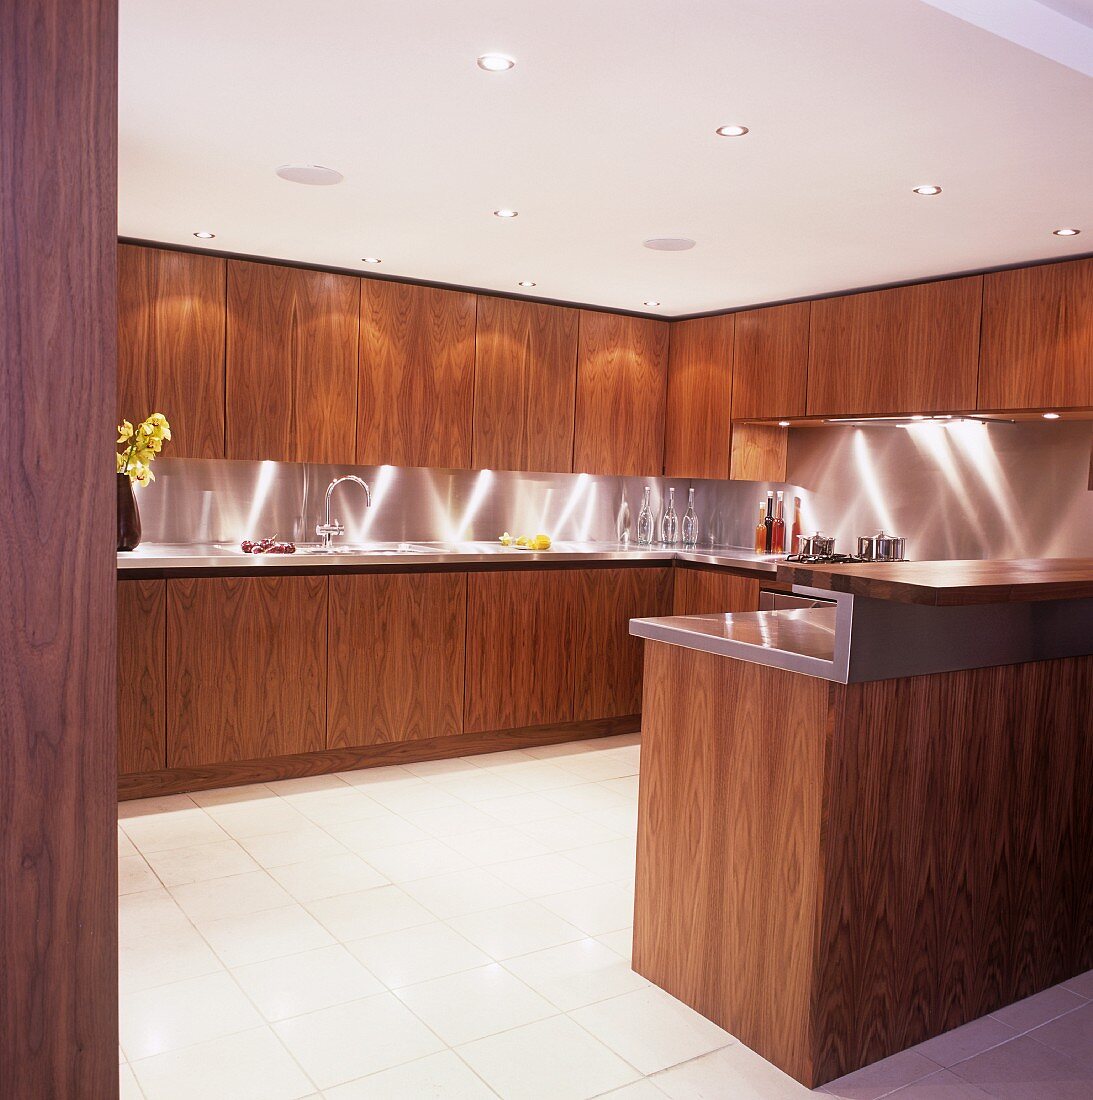 An illuminated kitchen with wooden cupboards